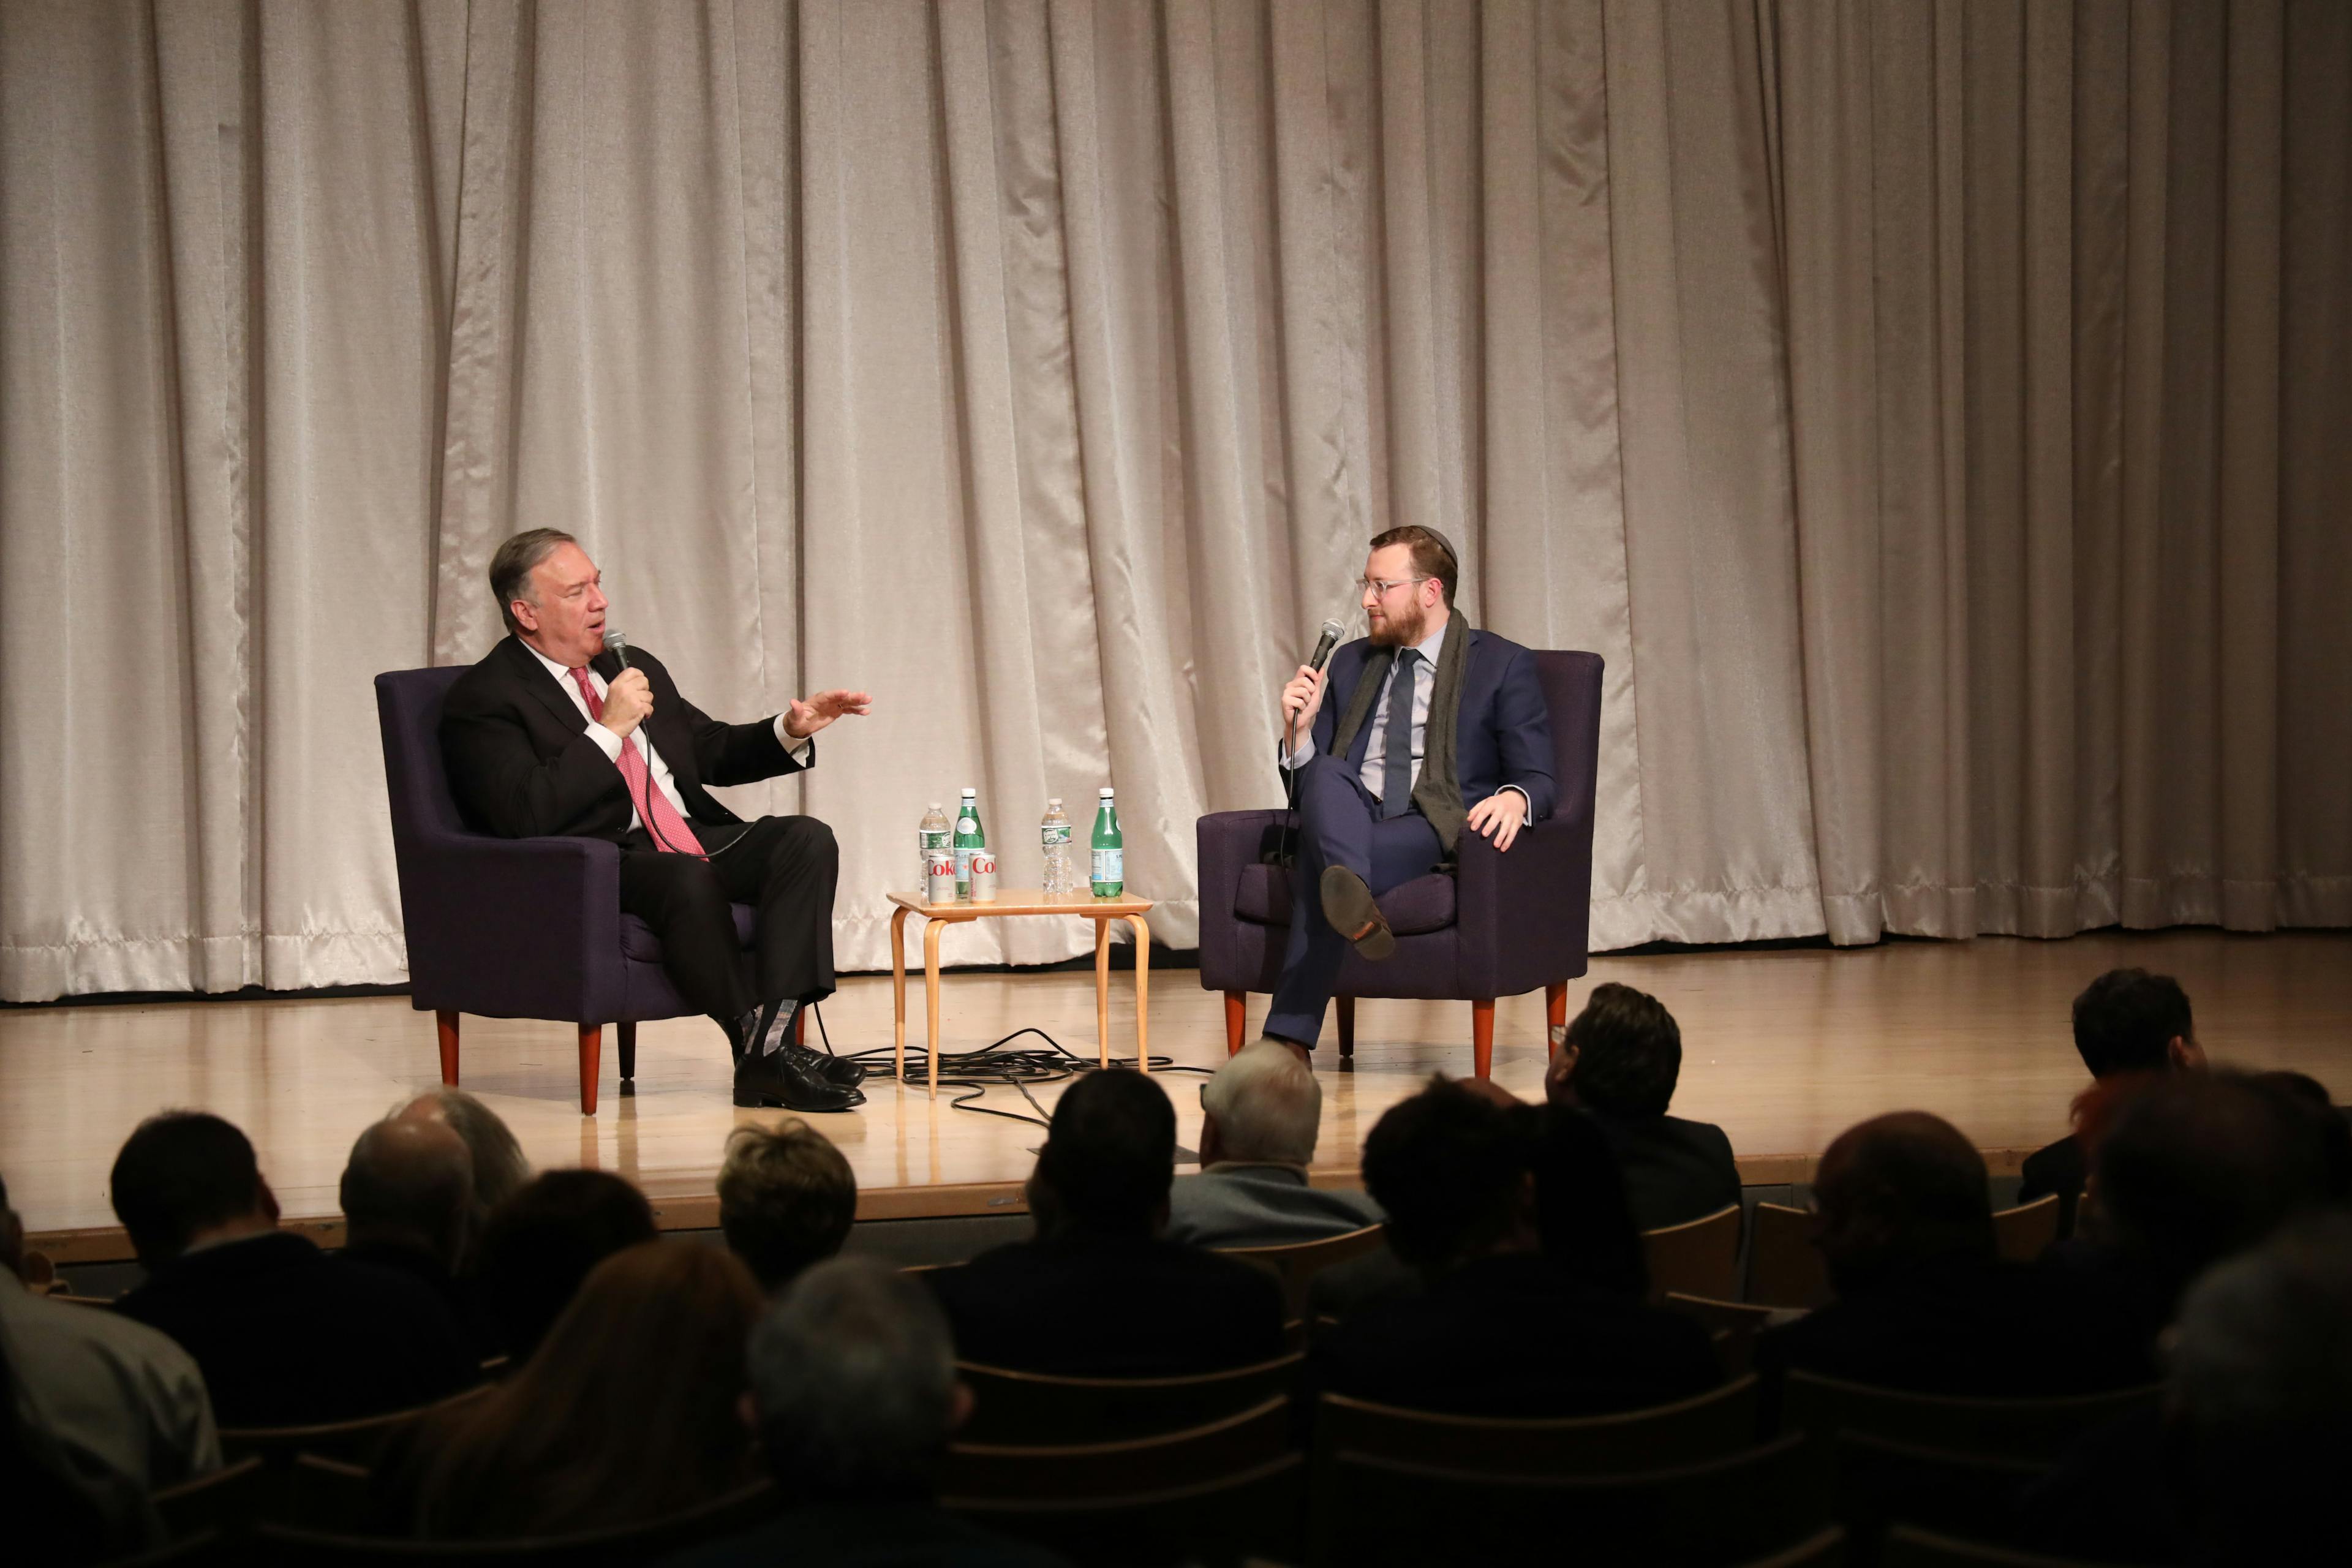 The New York Sun publisher, Dovid Efune, interviews the former secretary of state, Mike Pompeo, at Scandinavia House, New York, January 22, 2023.